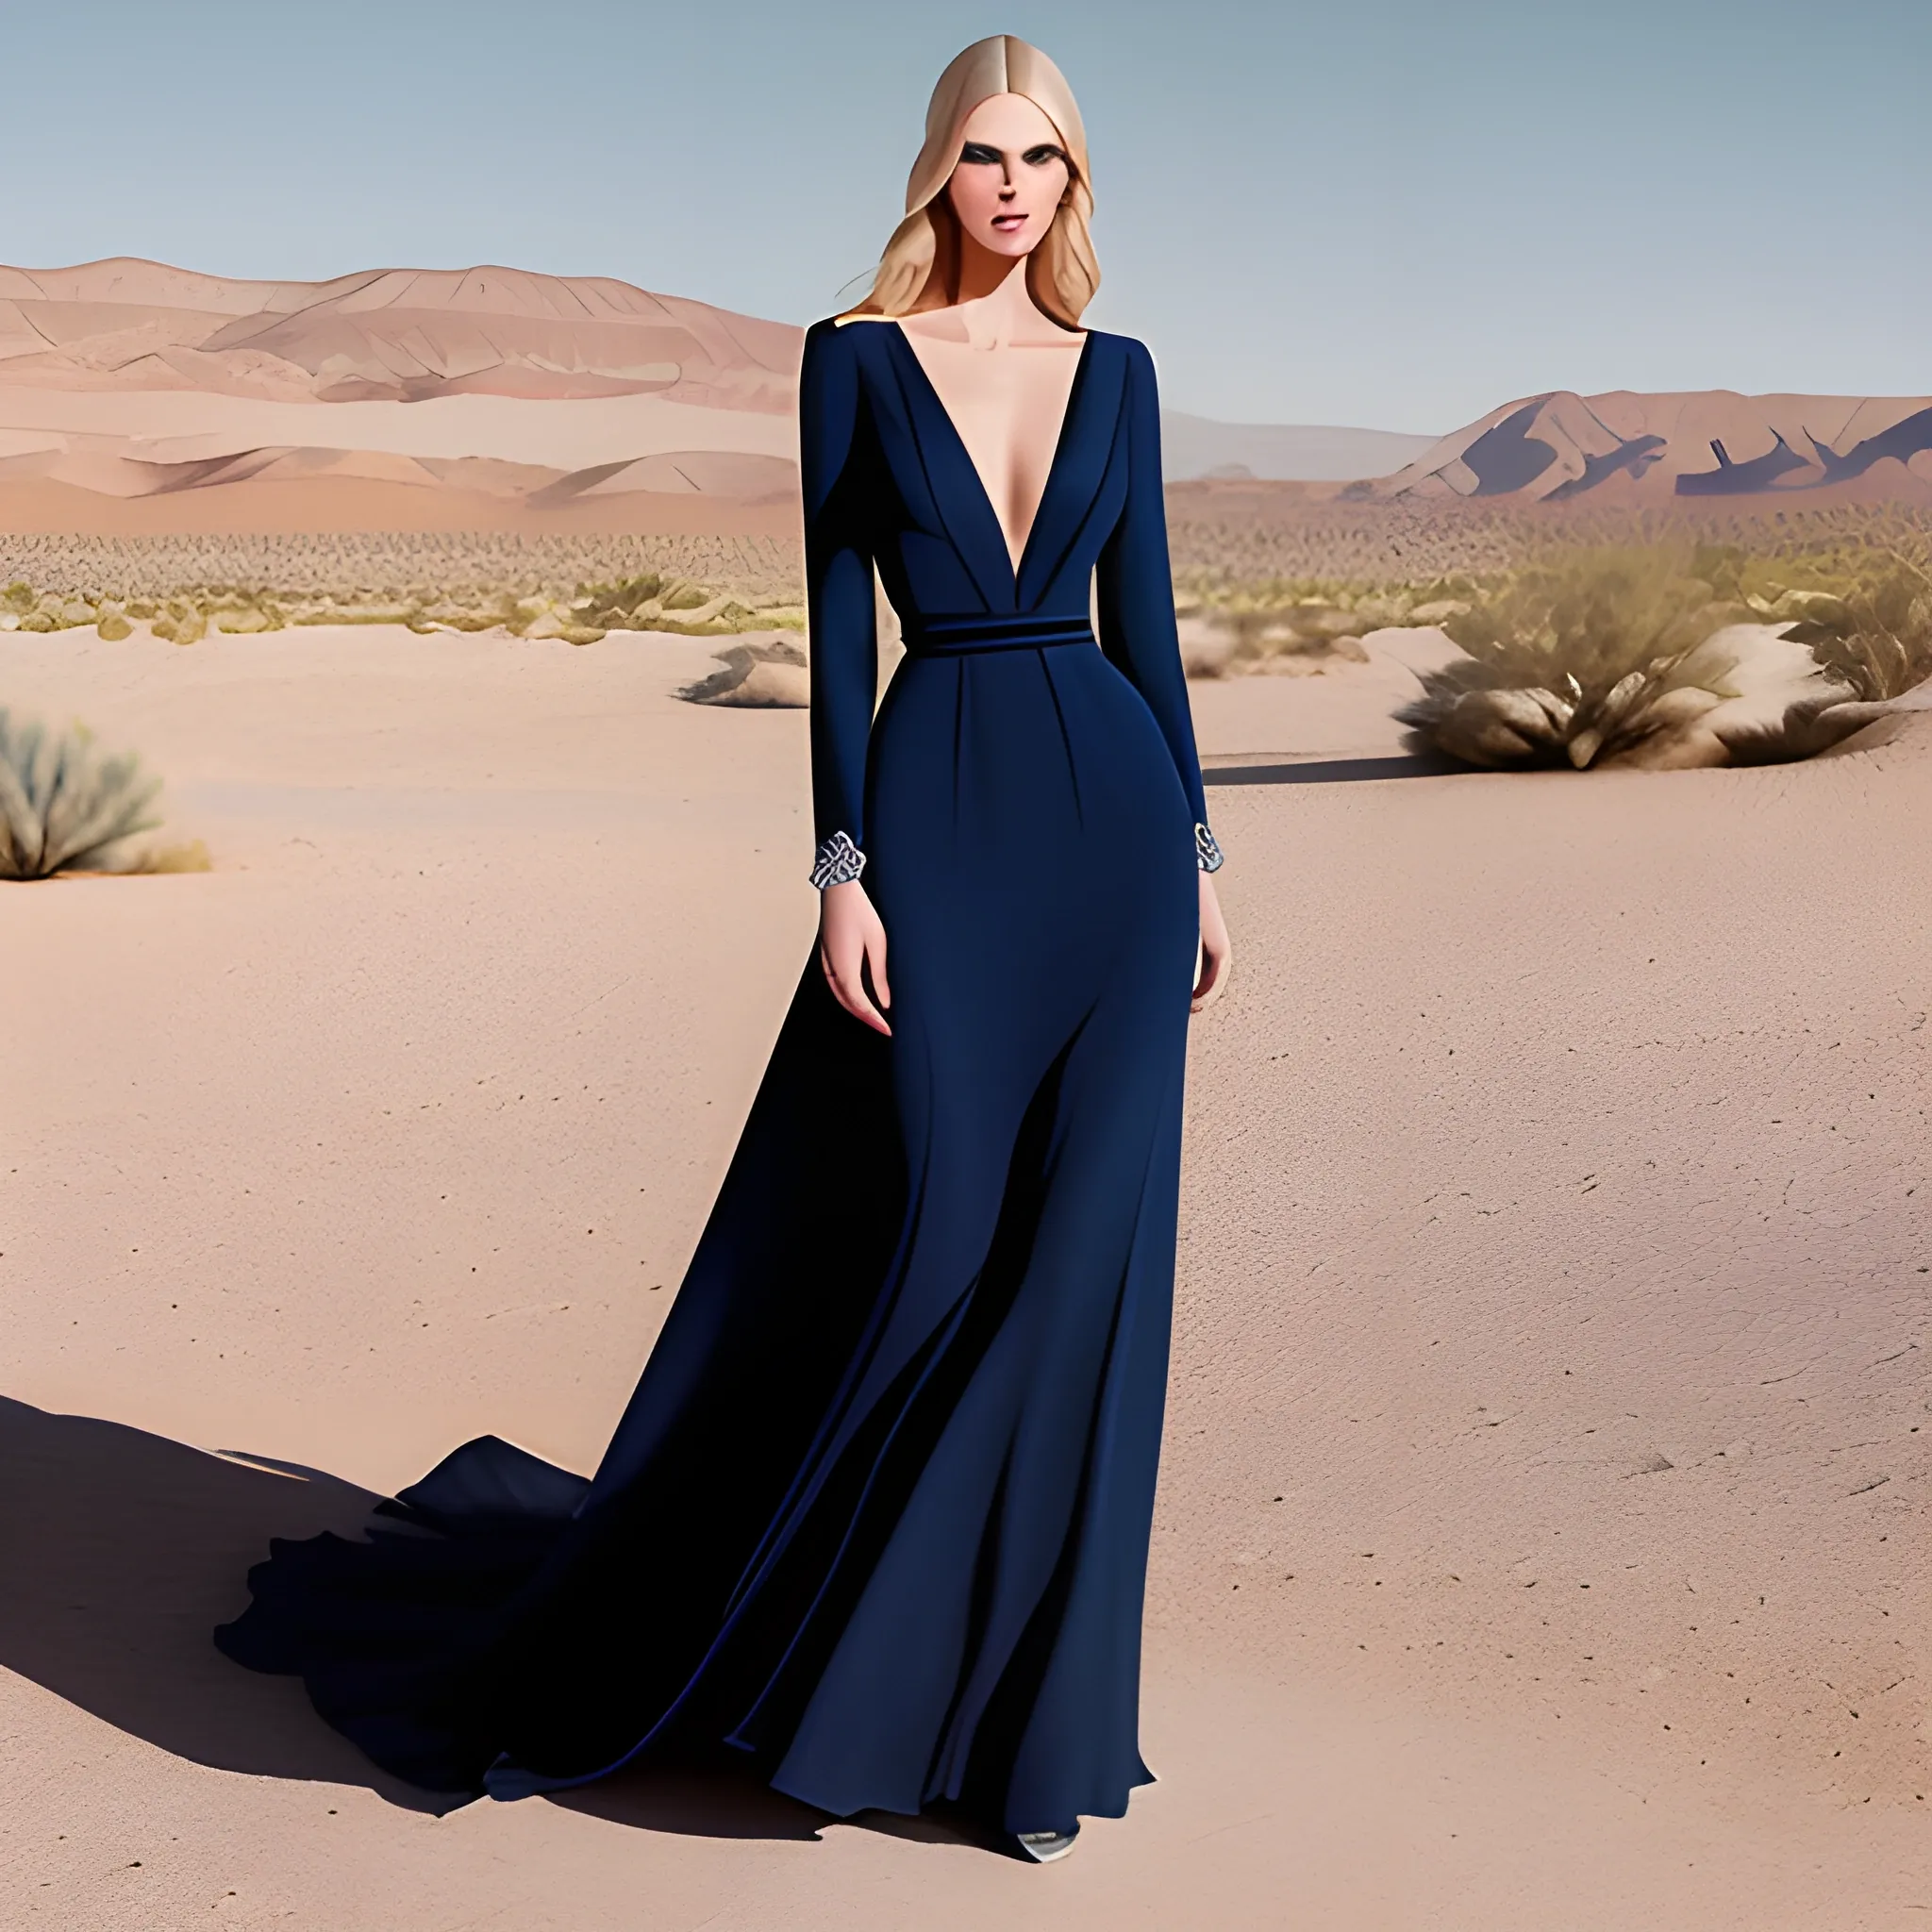 beautiful girl fair, blonde.  wearing a Navy blue Elie Saab garment, with minimal accessory in the middle of the desert. 

realistic, photograph 